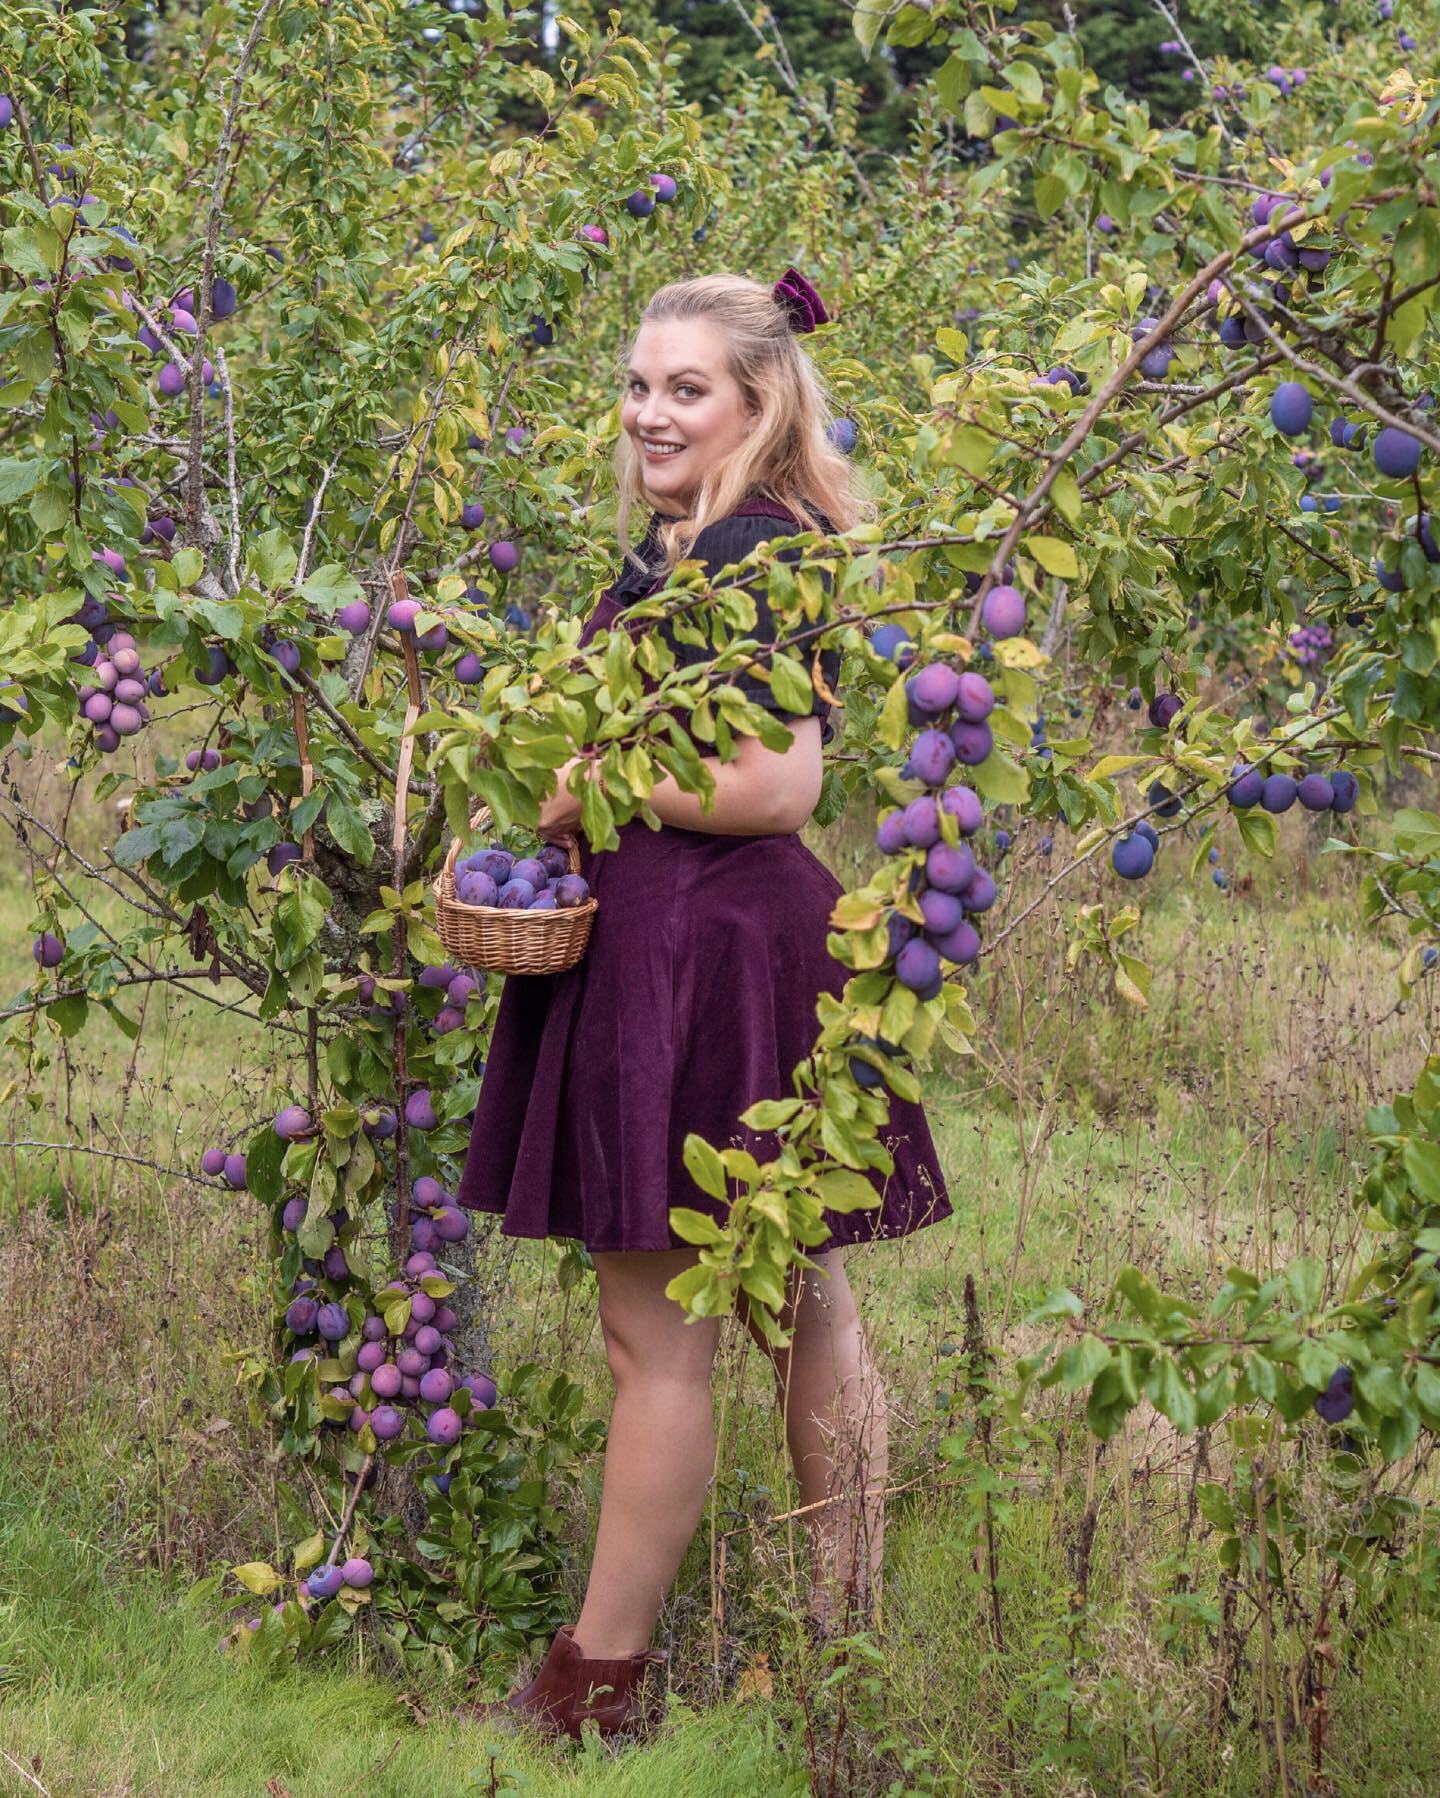 Plum Picking Orchard PYO. A blonde girl stands in a plum orchard carrying a small straw basket full of bright purple plums wearing a purple corduroy pinafore dress, a short sleeved black blouse and ankle boots.